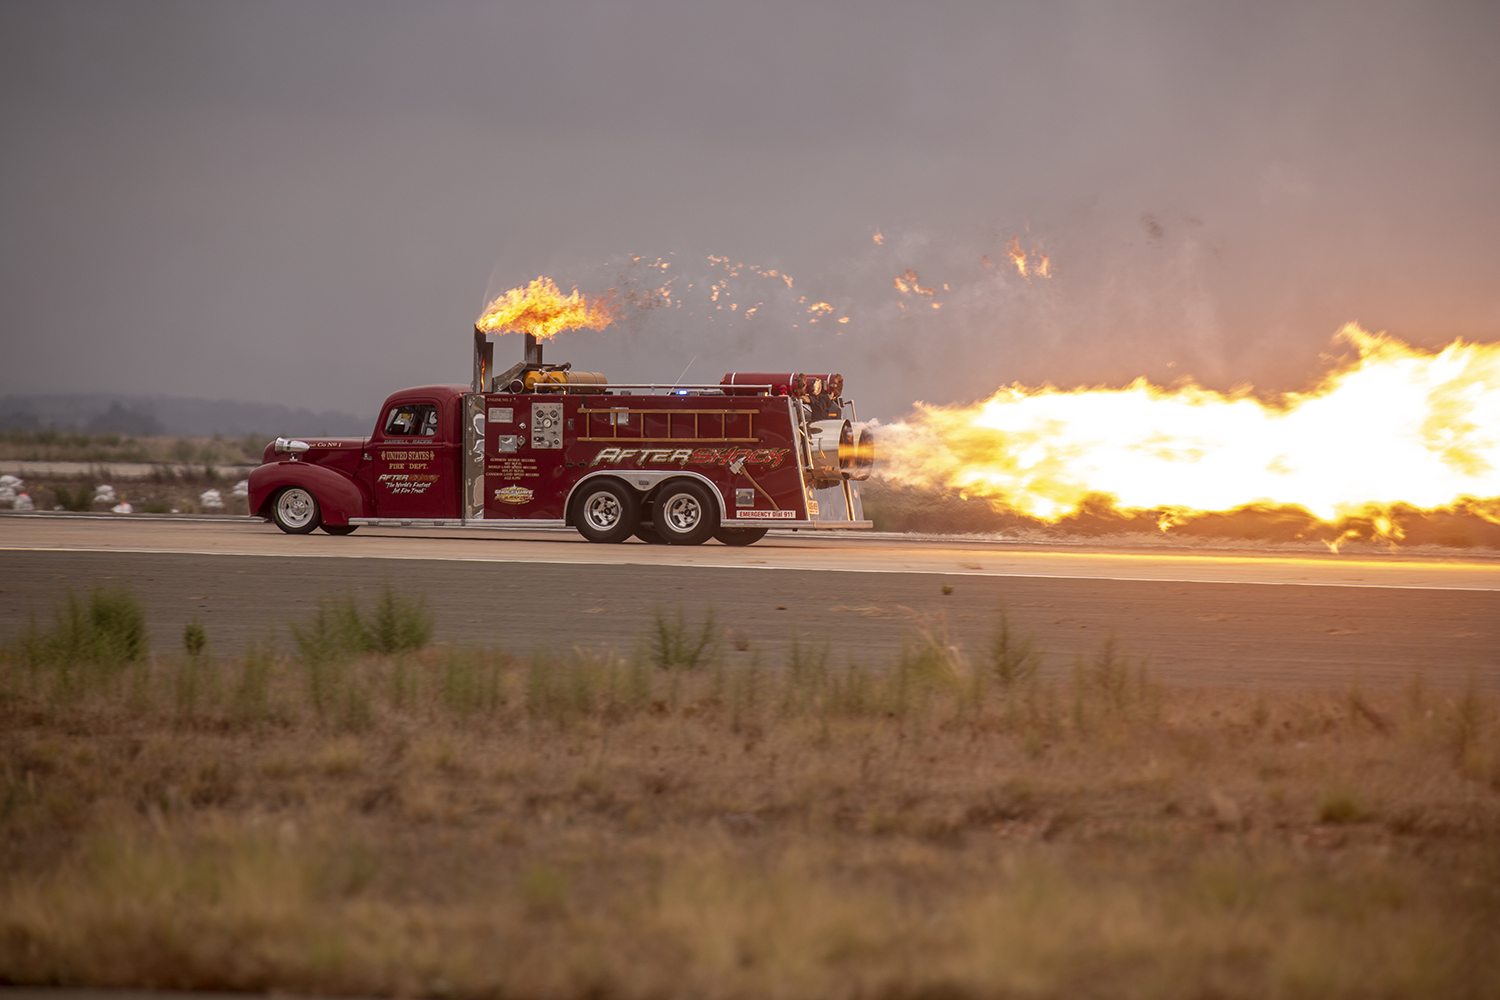 A jet-powered fire truck, races down the flight line at the 2019 Marine Corps Air Station Miramar Air Show on MCAS Miramar on Friday. (Photo: Lance Cpl. Robert Alejandre/Marine Corp.)